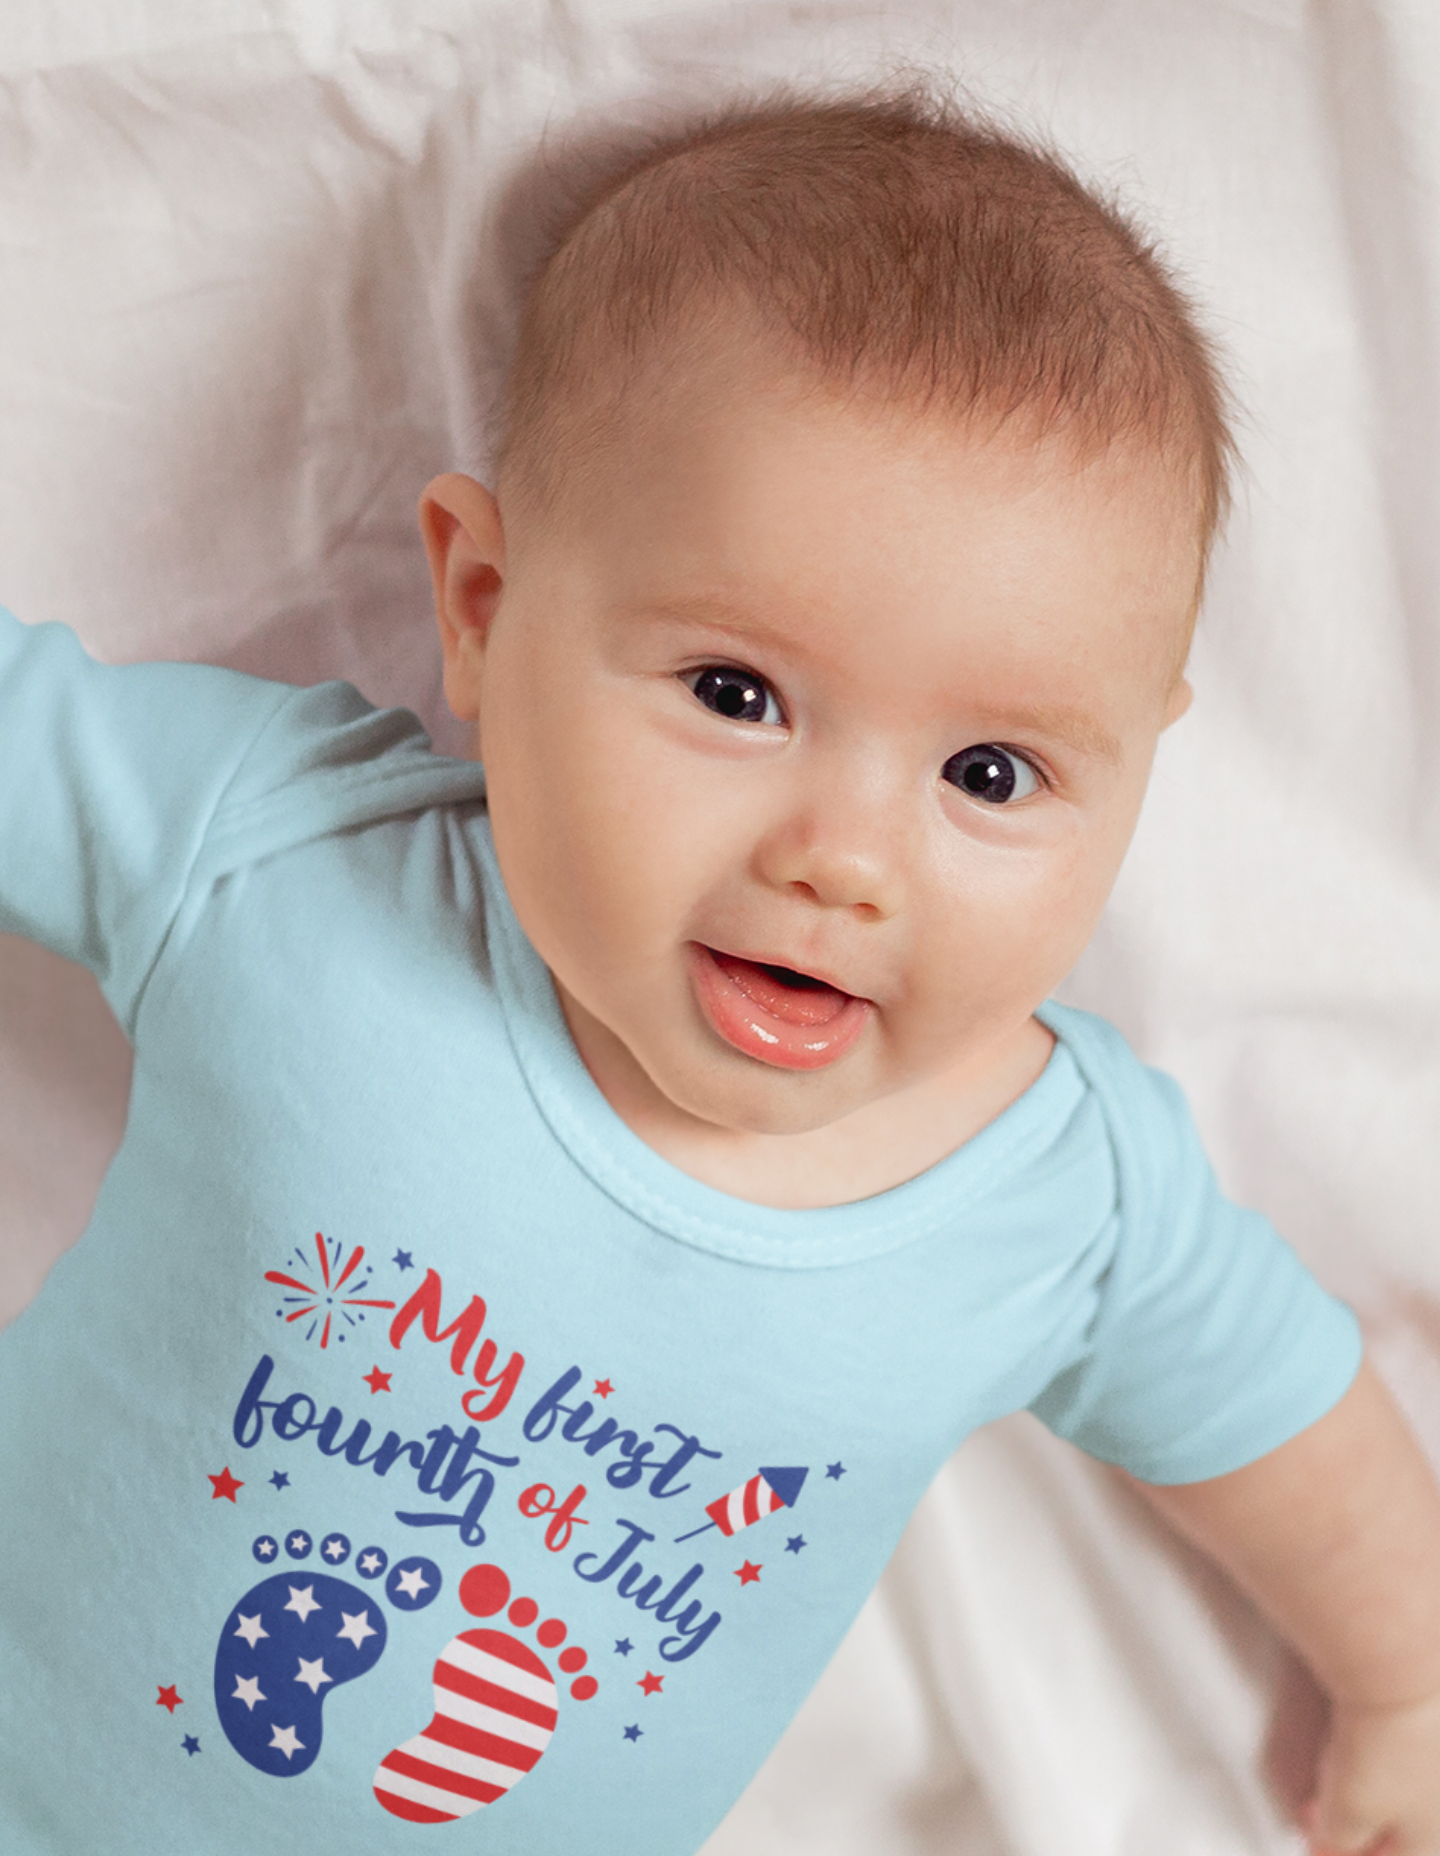 Get trendy with MY First 4th of July Onsie - Kids clothes available at Good Gift Company. Grab yours for $13.50 today!